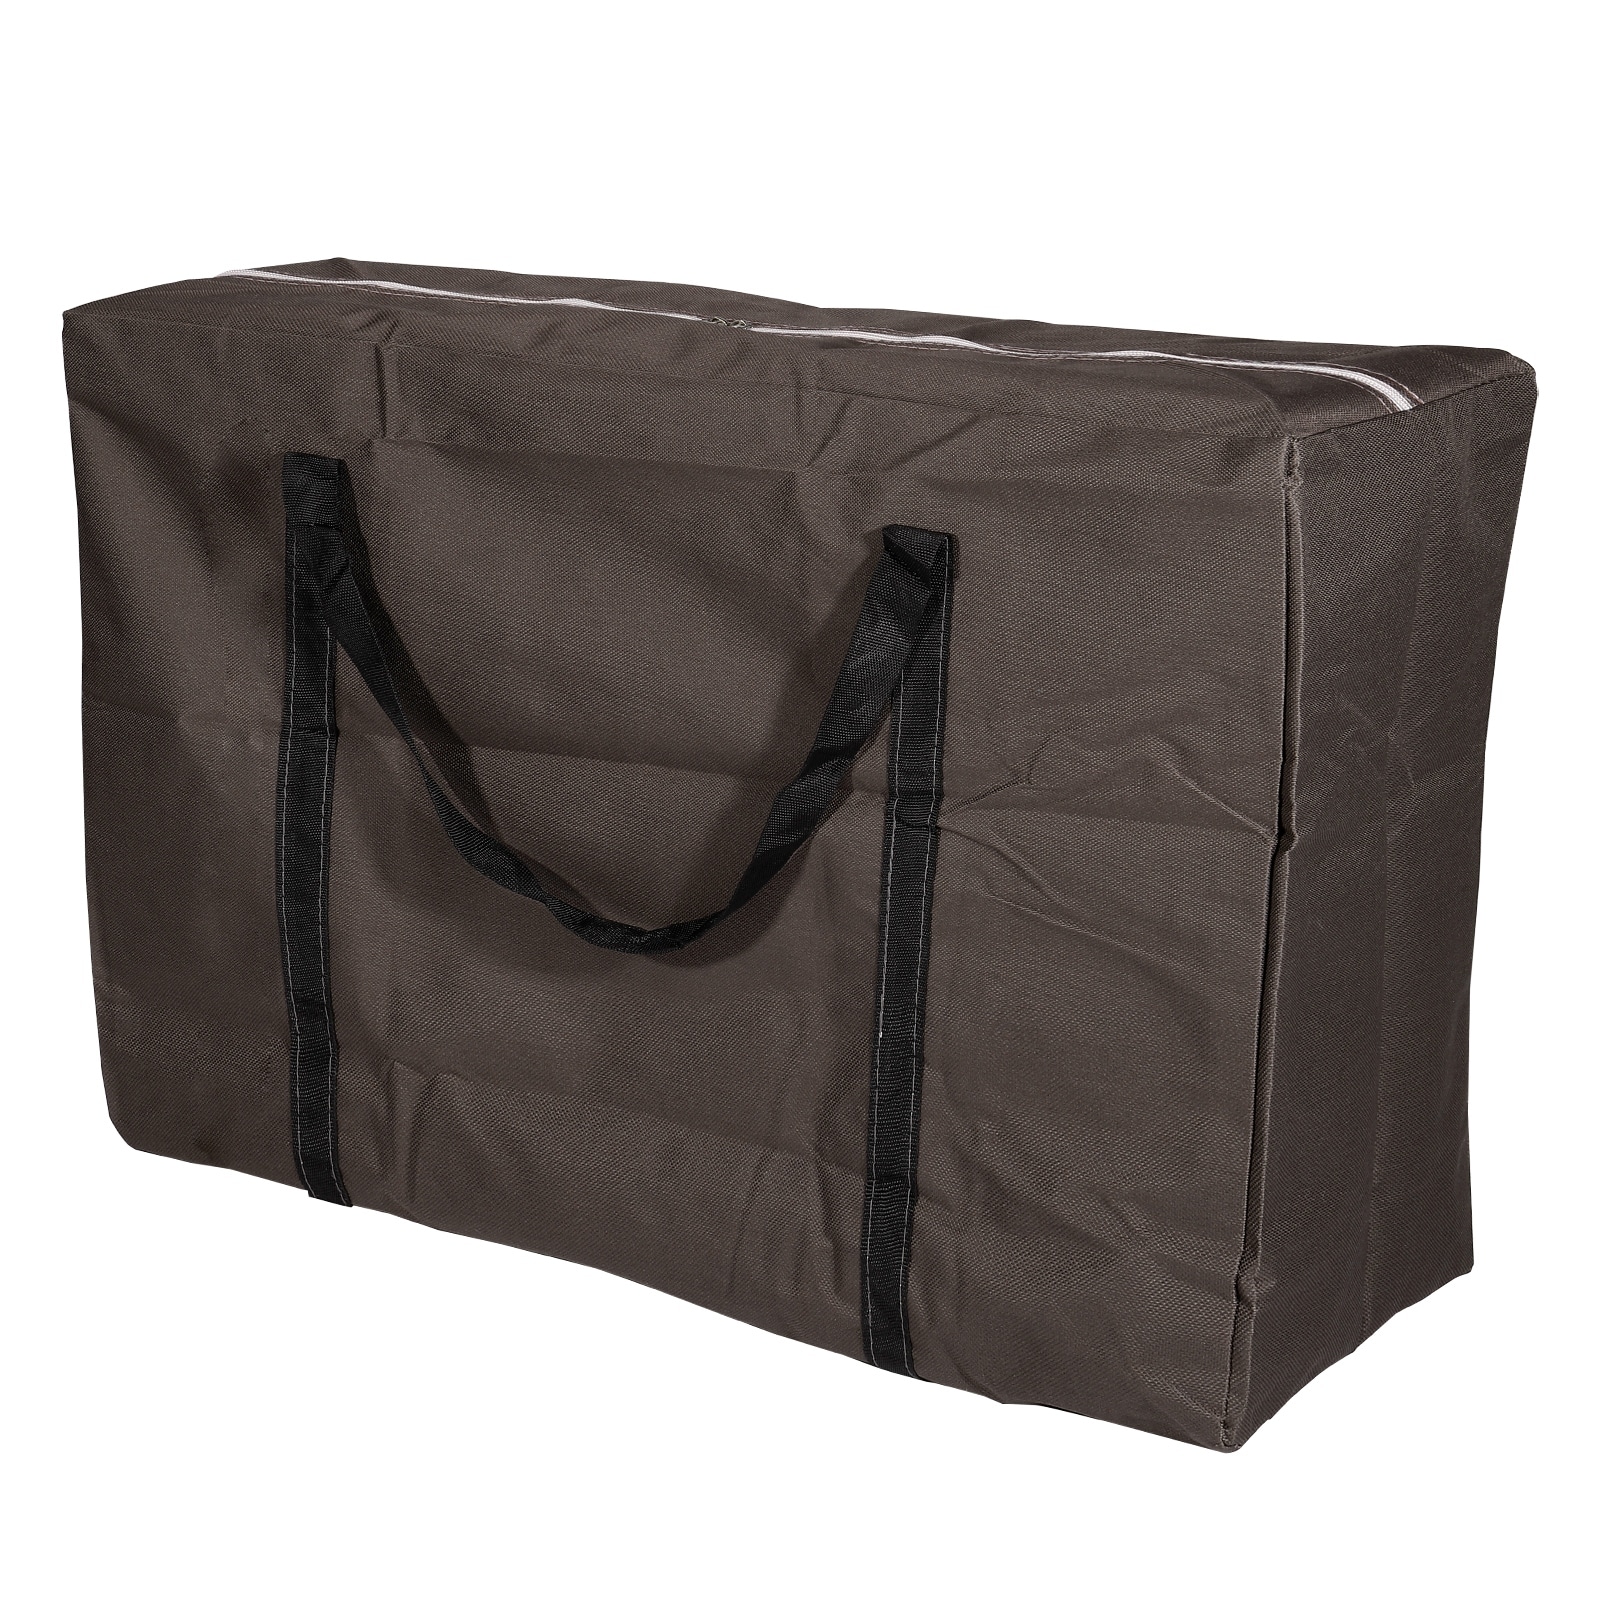 150l Moving Bags Heavy Duty Extra Large Storage Bags With Zipper